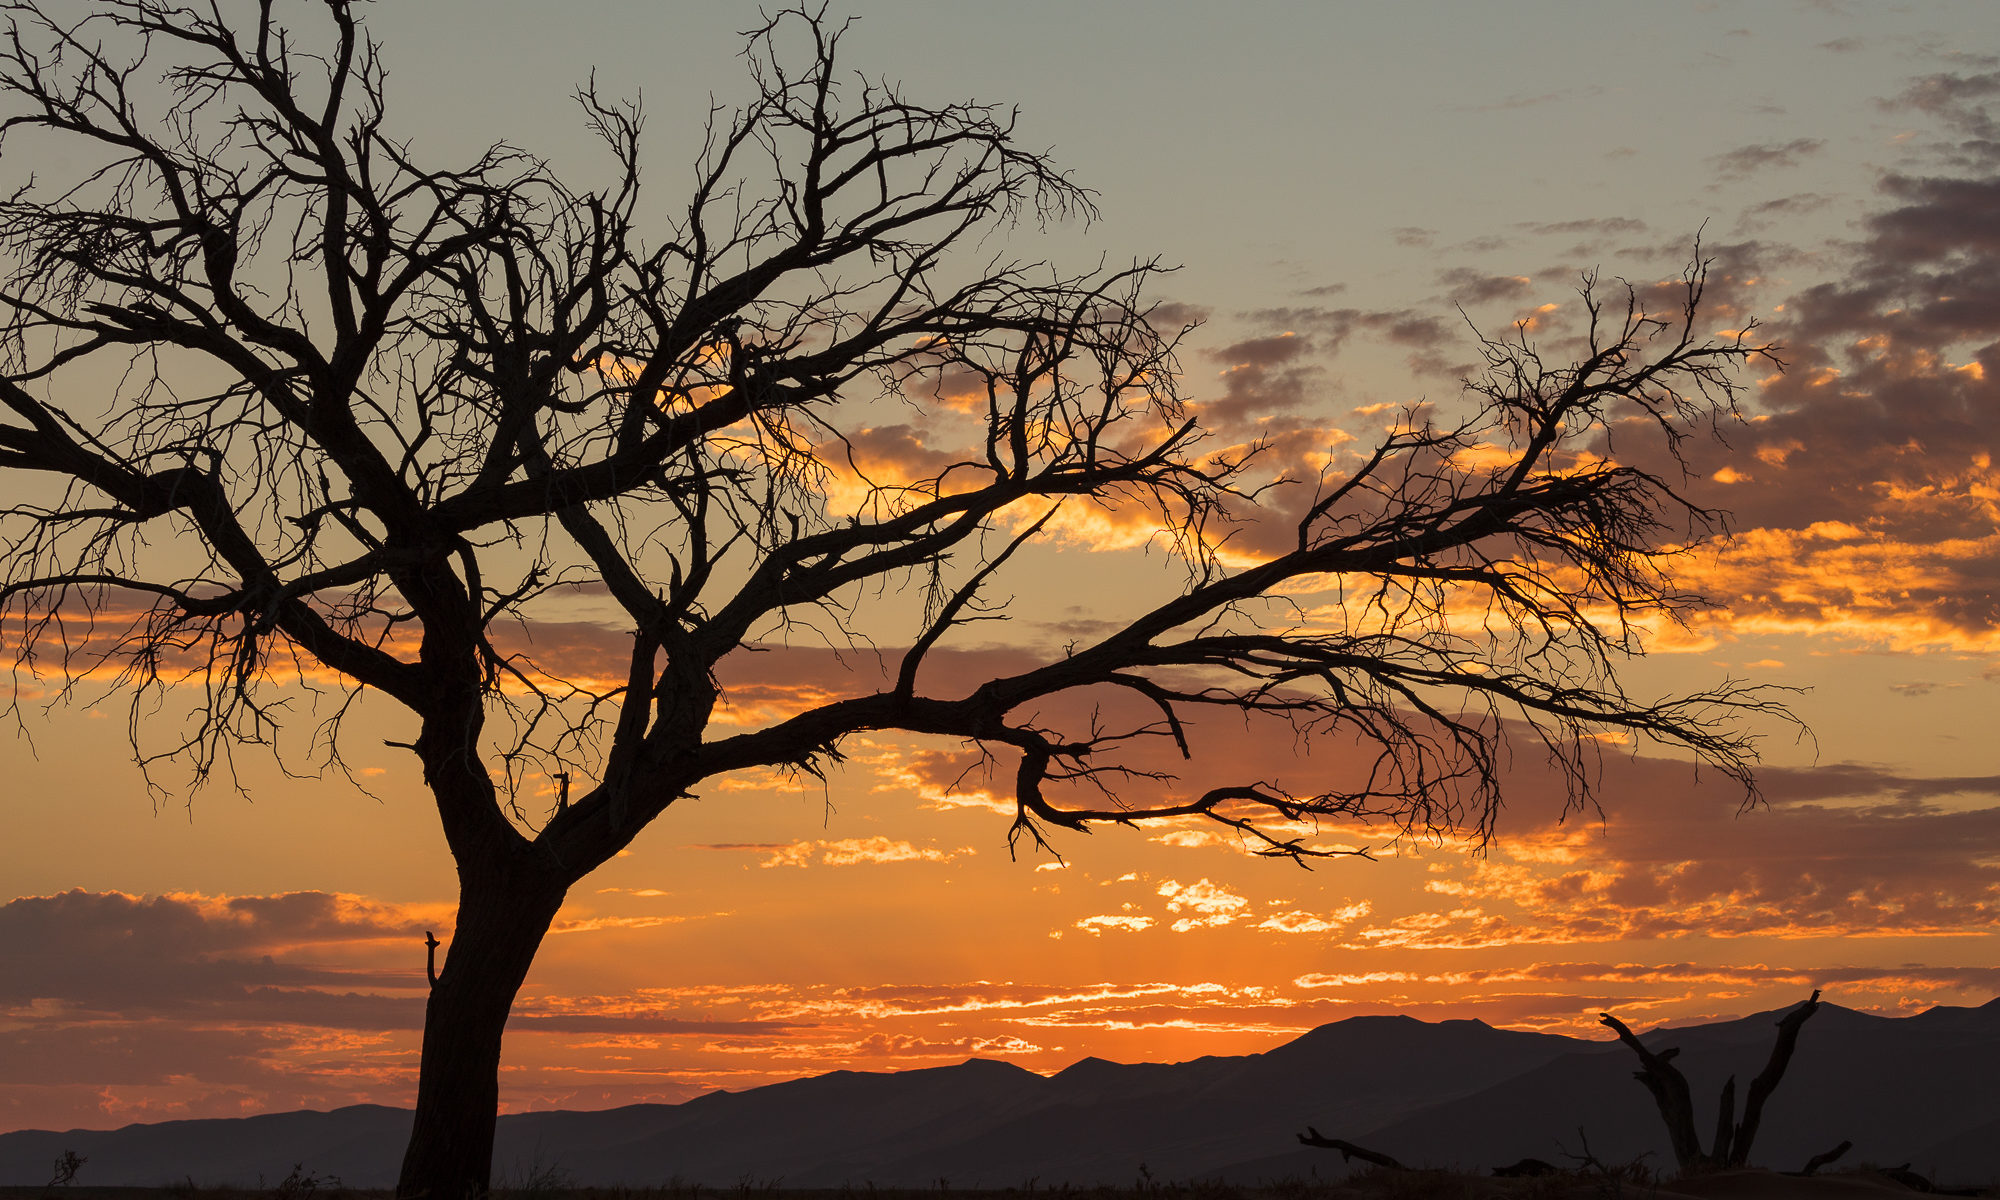 A desert tree silhouettes against a sunset sky, Namib-Naukluft National Park, Namibia.